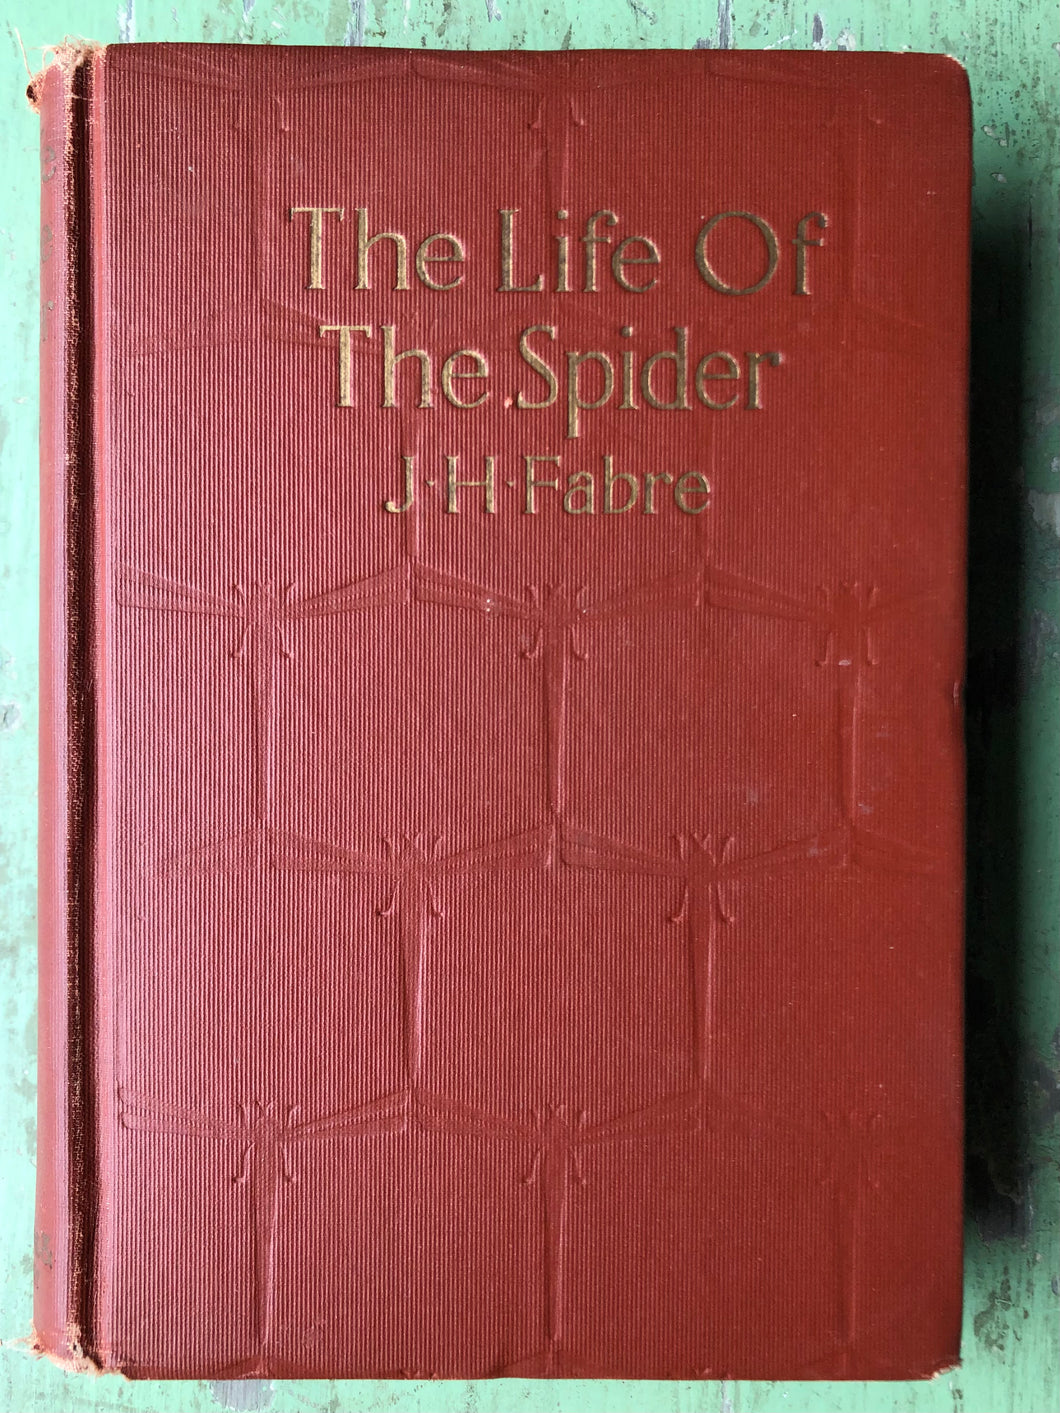 The Life of the Spider. by J. Henri Fabre